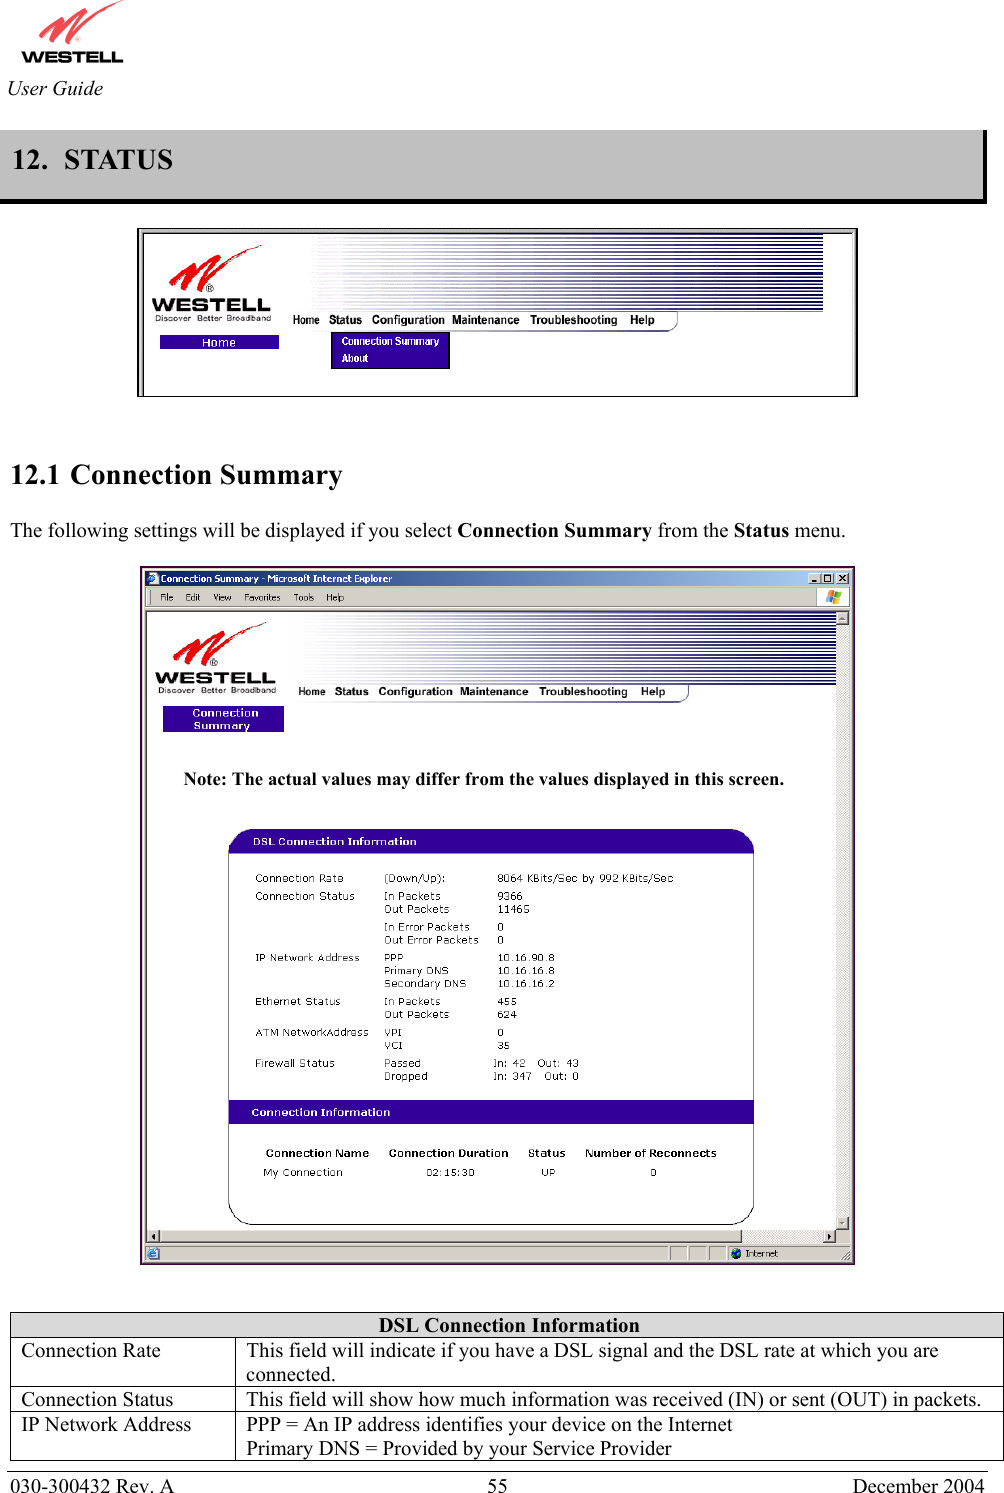       030-300432 Rev. A  55 December 2004  User Guide 12.  STATUS      12.1 Connection Summary  The following settings will be displayed if you select Connection Summary from the Status menu.      DSL Connection Information Connection Rate  This field will indicate if you have a DSL signal and the DSL rate at which you are connected. Connection Status  This field will show how much information was received (IN) or sent (OUT) in packets. IP Network Address  PPP = An IP address identifies your device on the Internet Primary DNS = Provided by your Service Provider Note: The actual values may differ from the values displayed in this screen. 